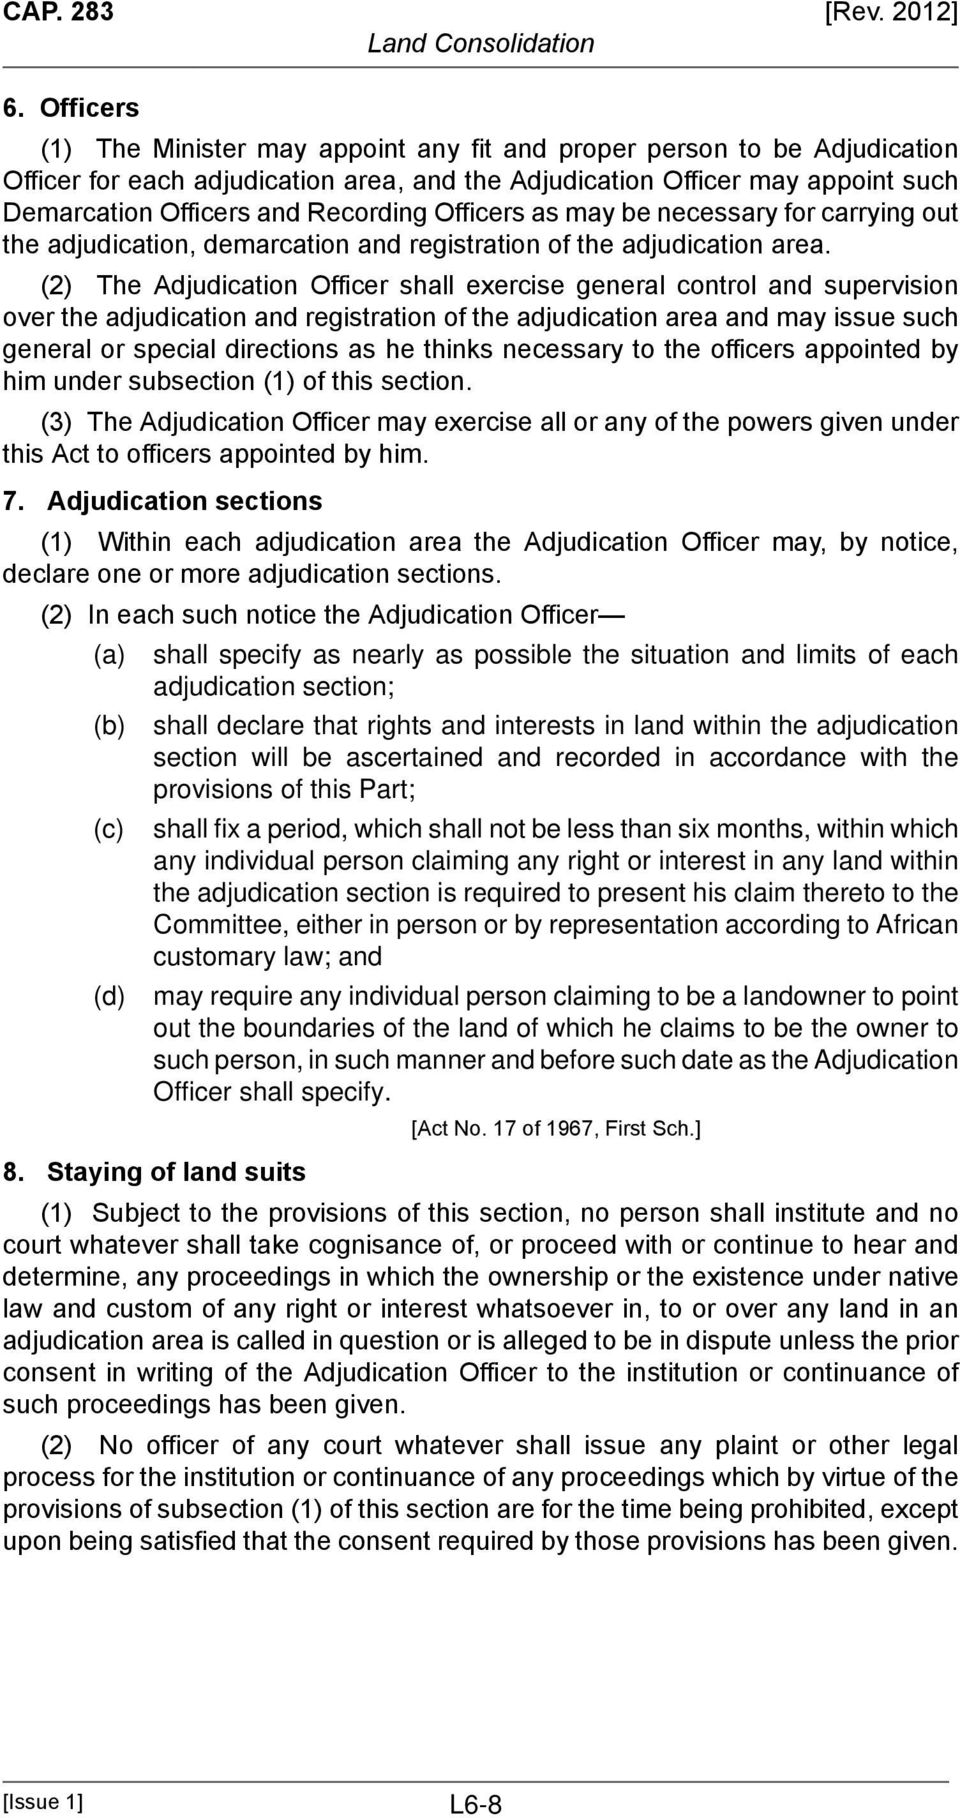 Officers as may be necessary for carrying out the adjudication, demarcation and registration of the adjudication area.